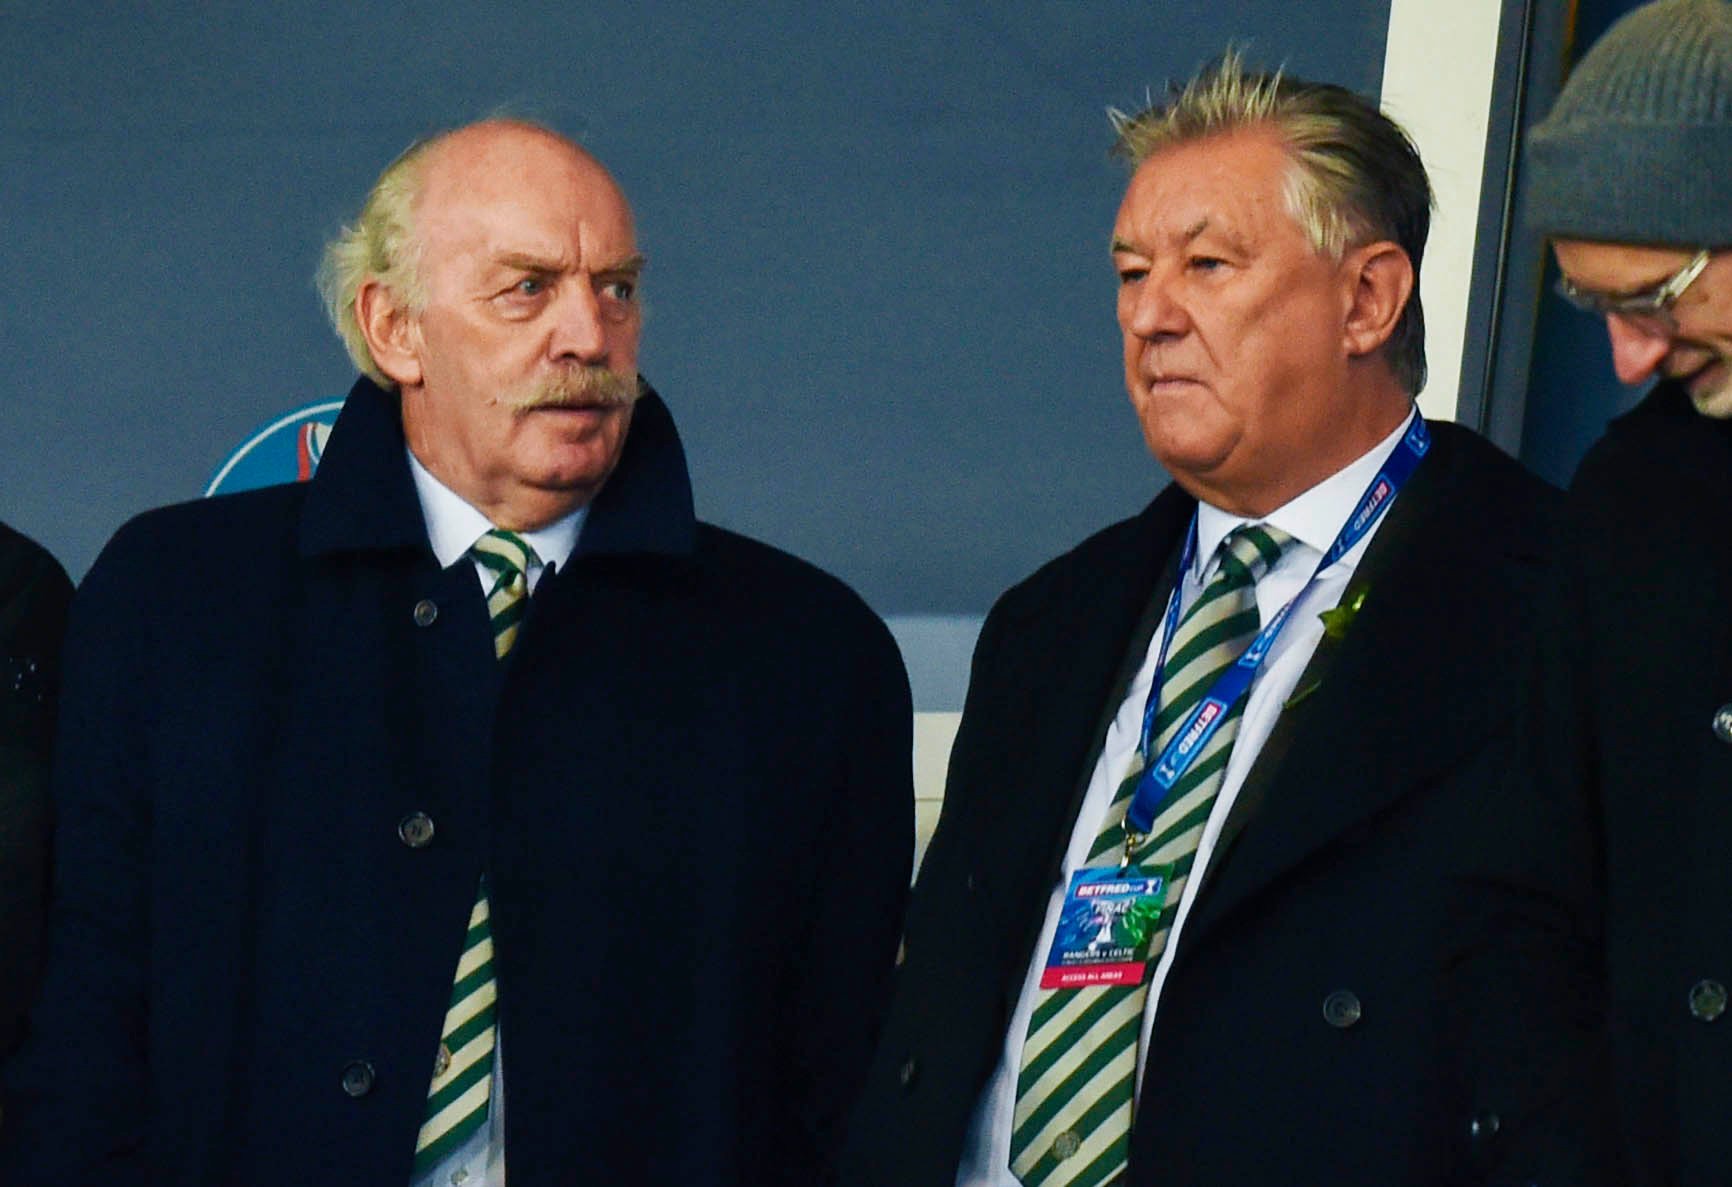 Celtic's largest shareholder Dermot Desmond and Chief Executive Peter Lawwell